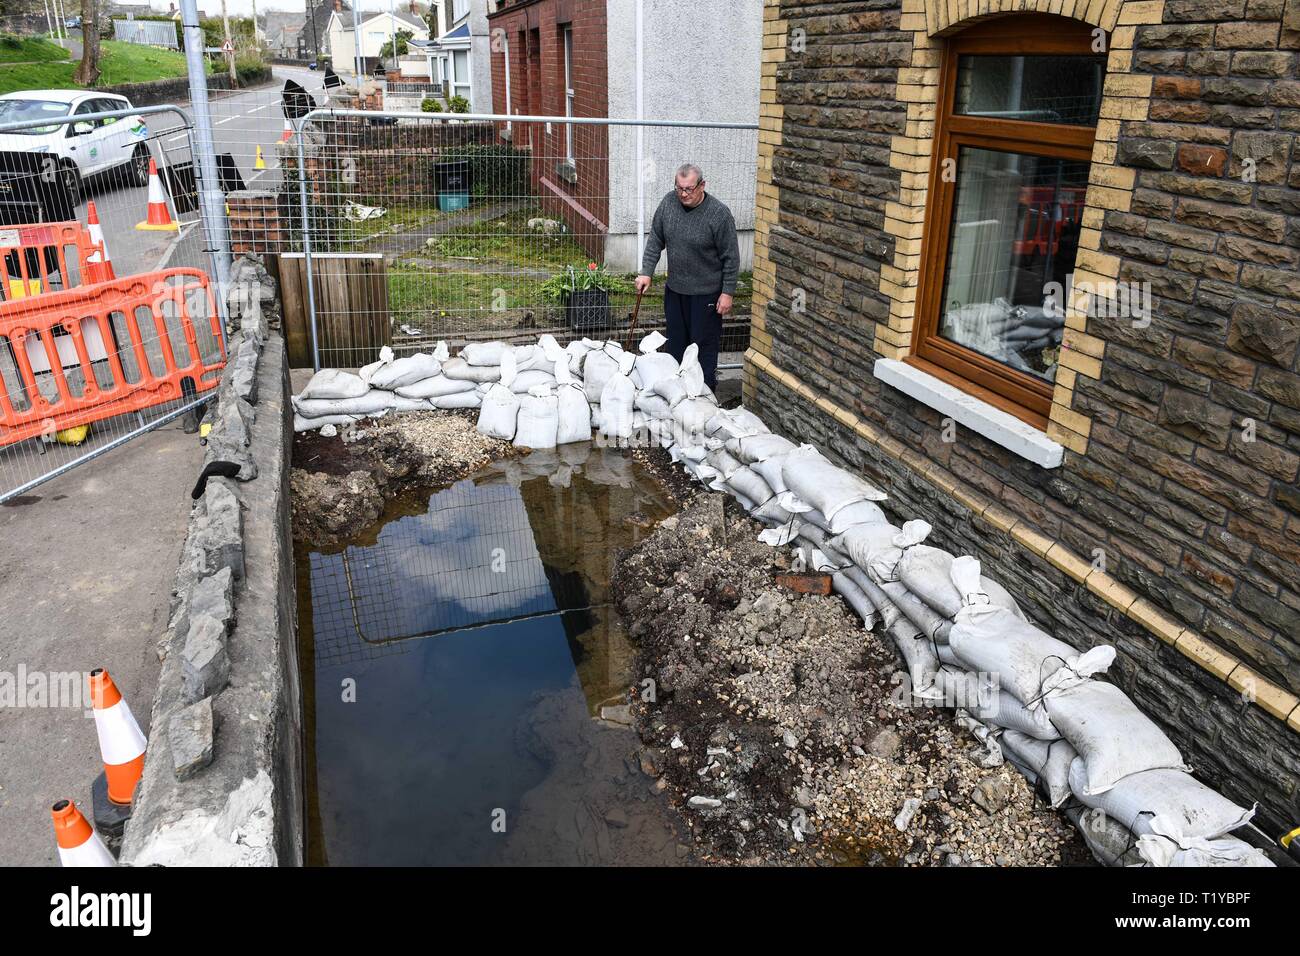 Swansea Valley, South Wales, UK. 29th March 2019 Pictured is Alun Lewis from the small village of Ystalyfera near Swansea, who awoke to a thermal spring which magically appeared in the front garden of his home. The source of the water cannot be found, although it is believed to be flowing from and abandoned mine, close to the property. The day before the spring appeared, his wife was planting flowers in the garden of the home that they have lived in for over 40-years. Credit : Robert Melen/Alamy Live News Stock Photo